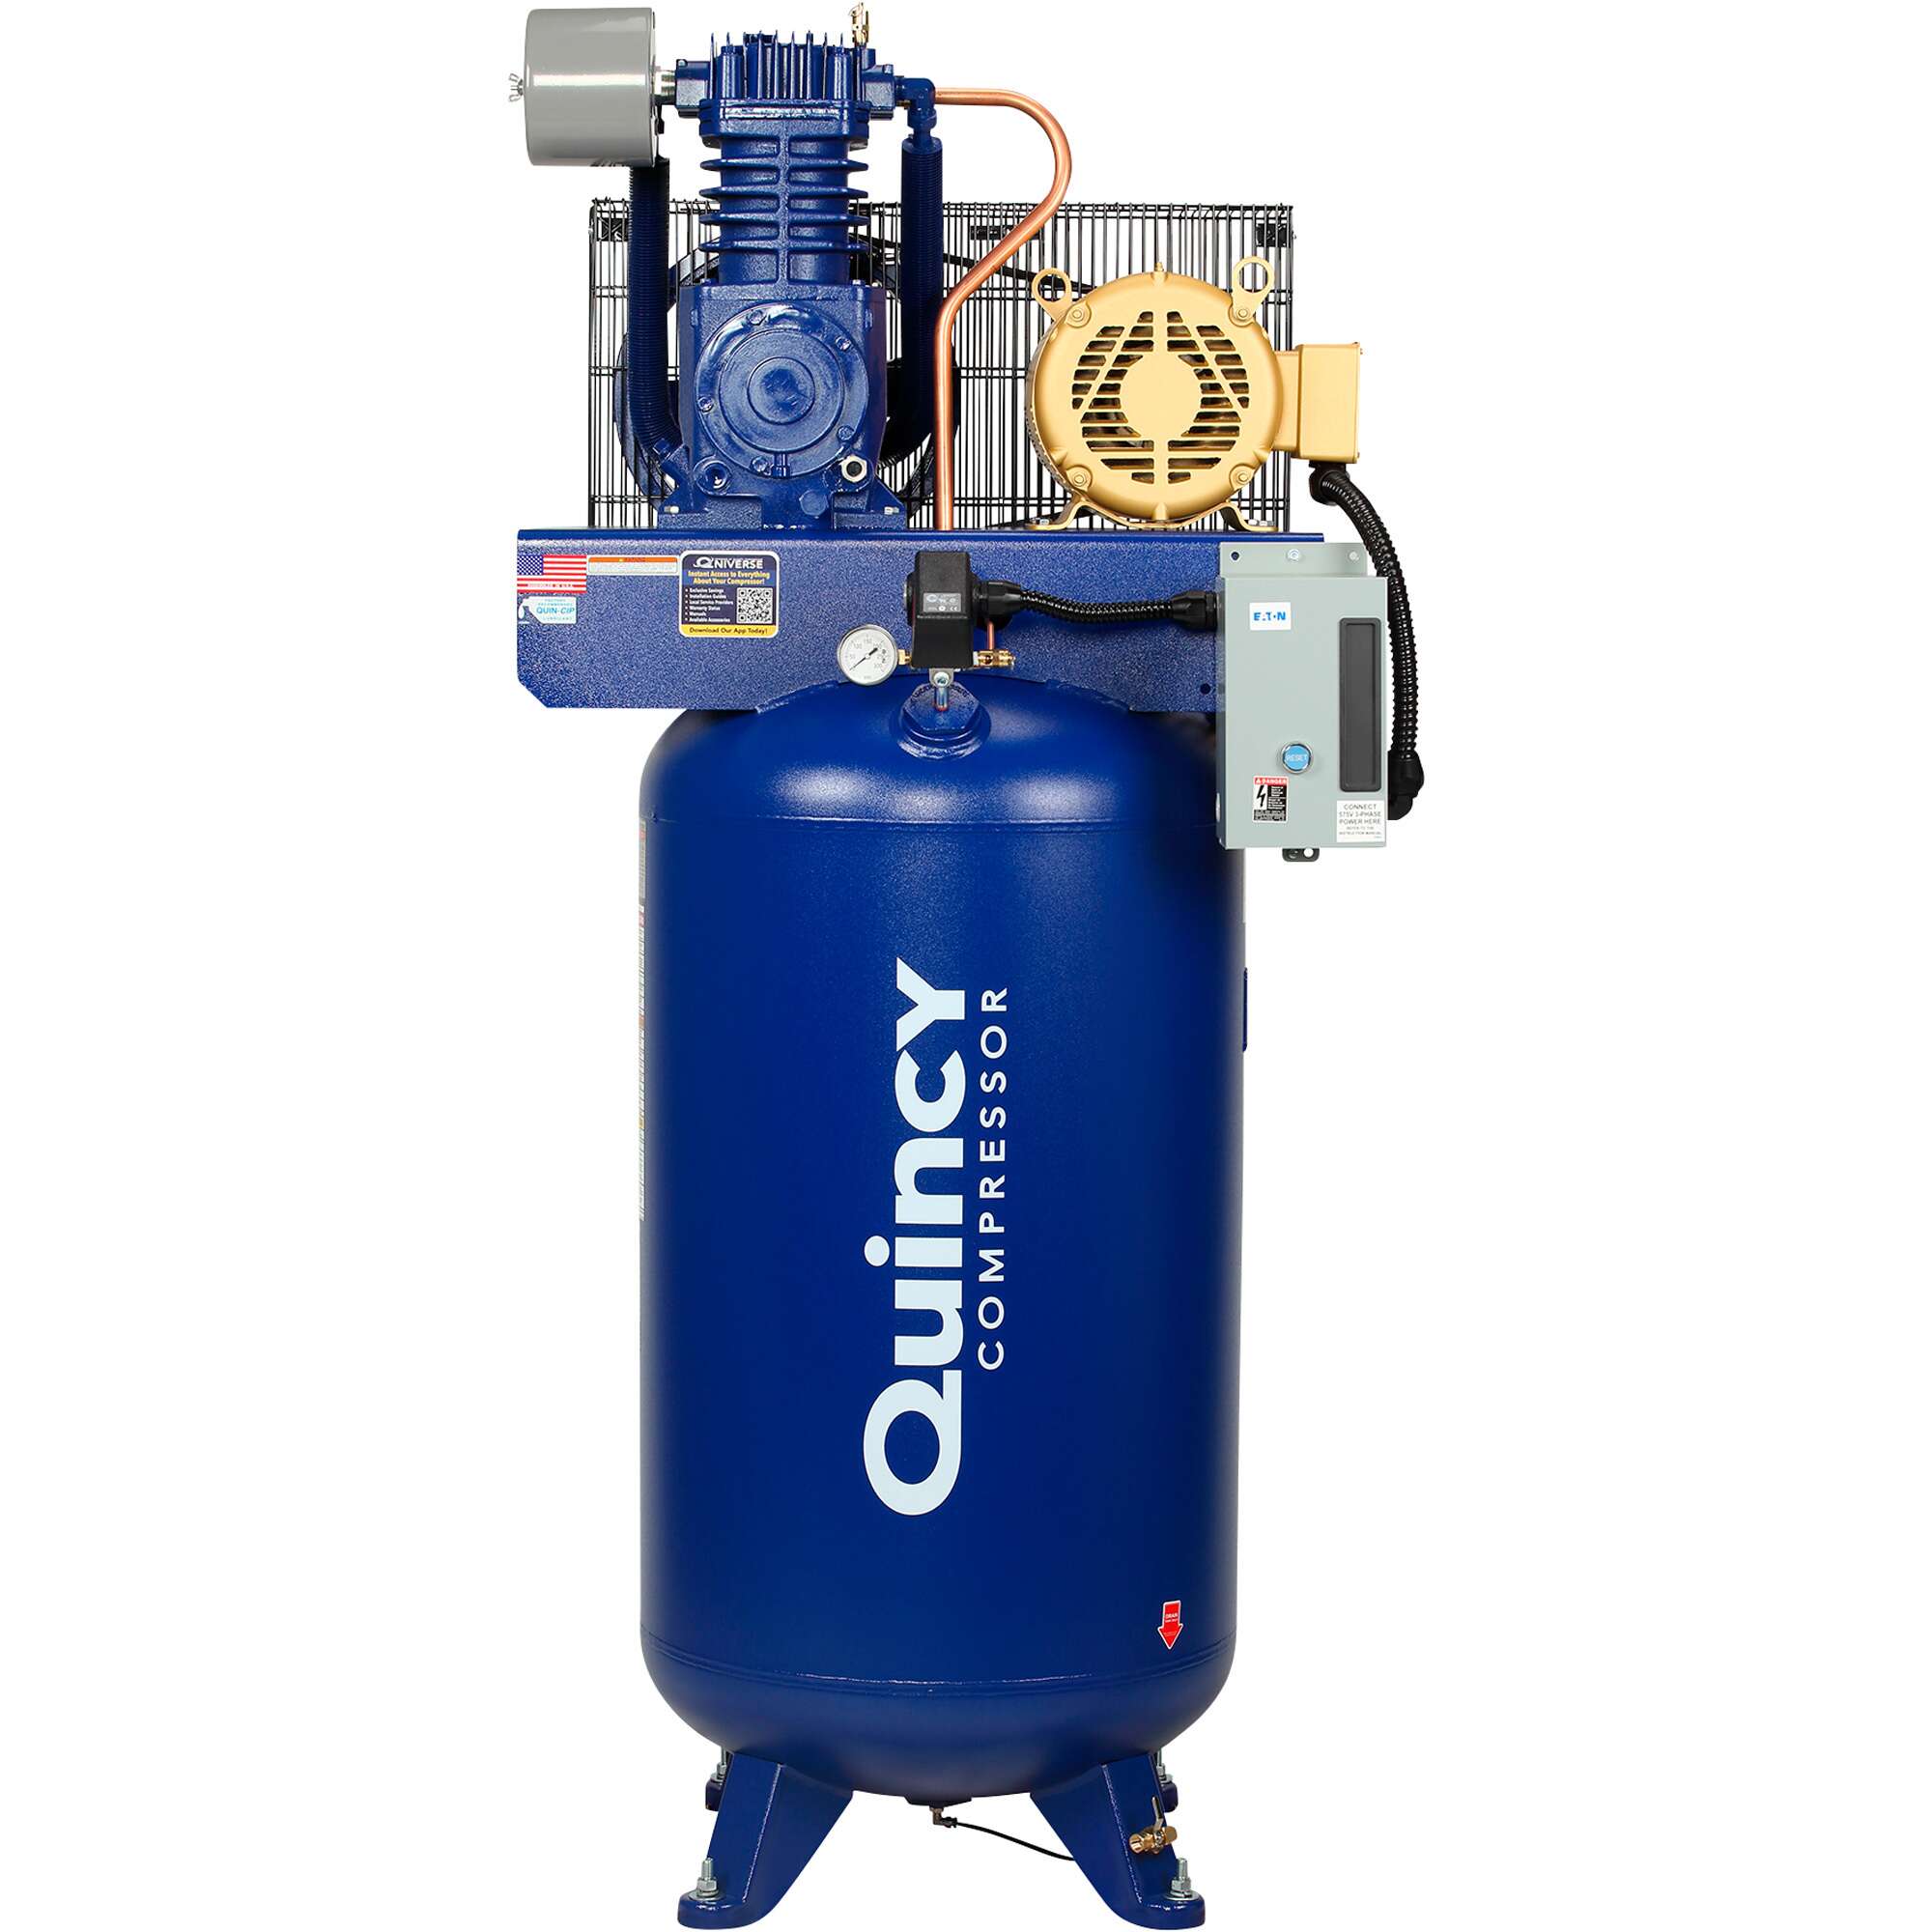 Quincy QTV7.5 Splash Lubricated Reciprocating Air Compressor 7.5 HP 230 Volt 3 Phase 80Gallon Vertical